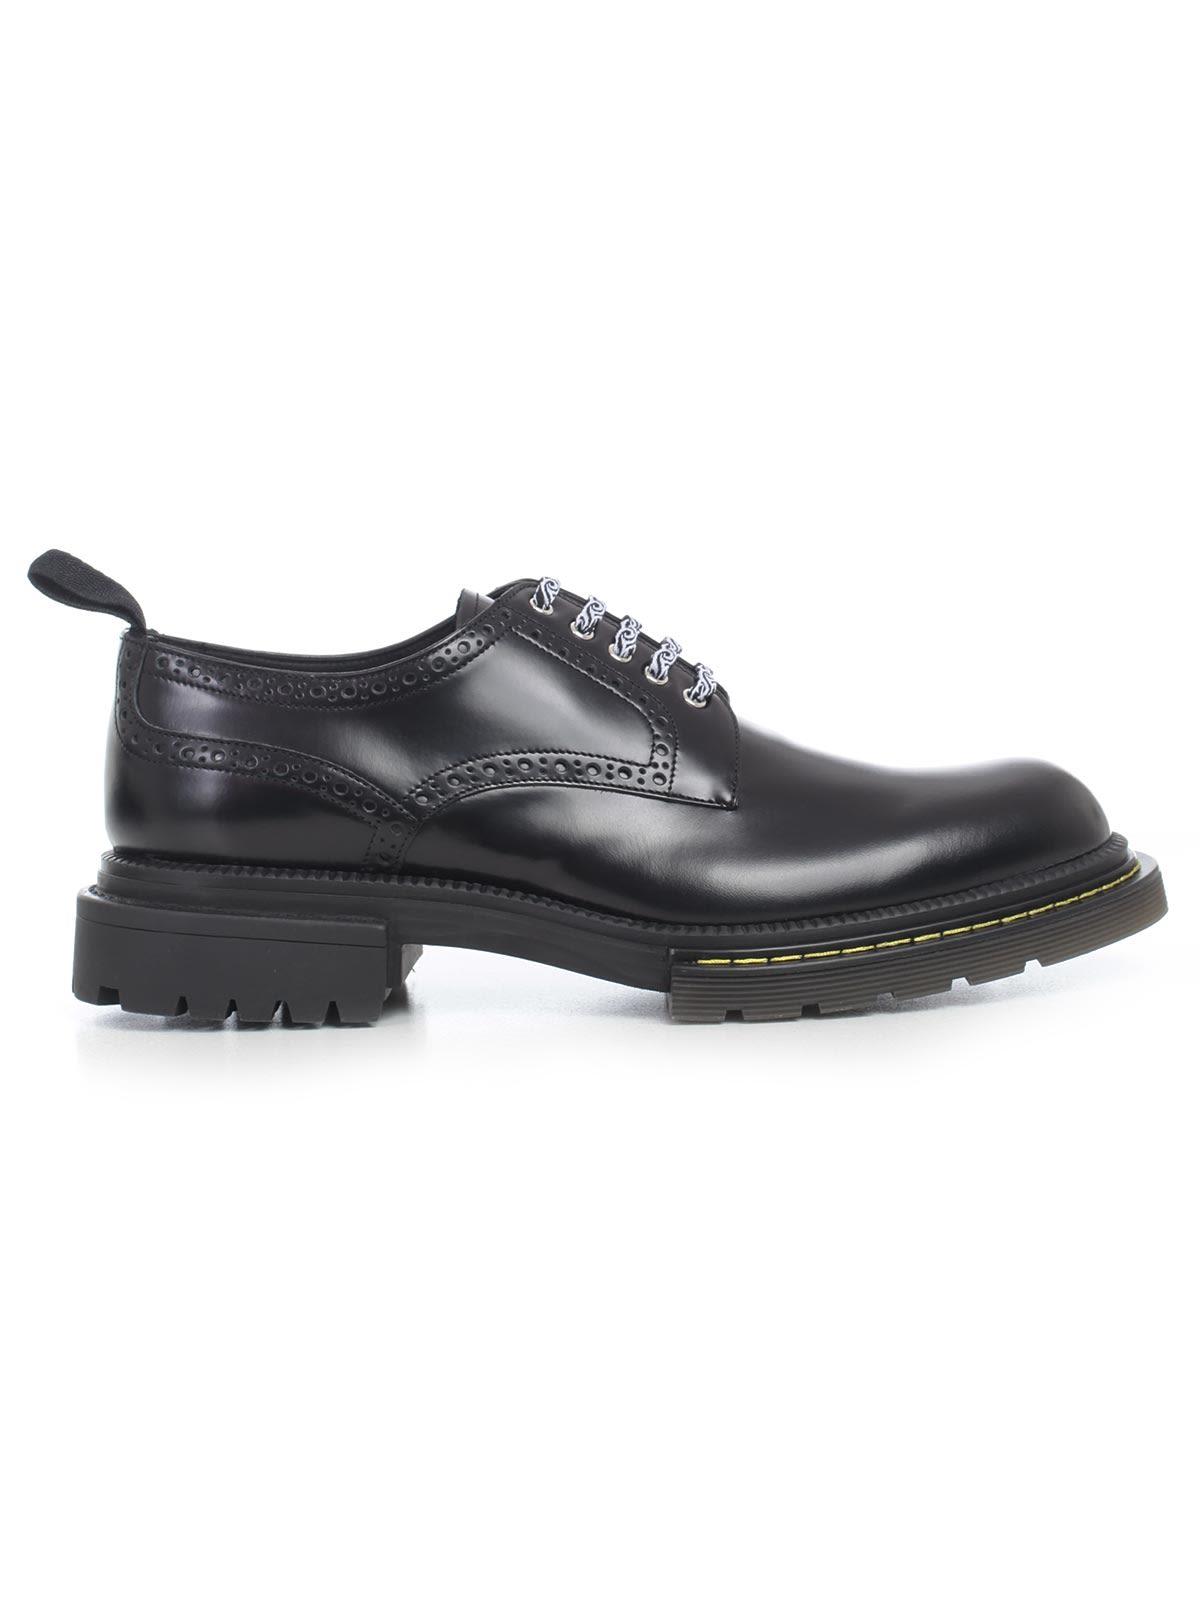 Dior Homme Brogue Derby Shoes In Black | ModeSens